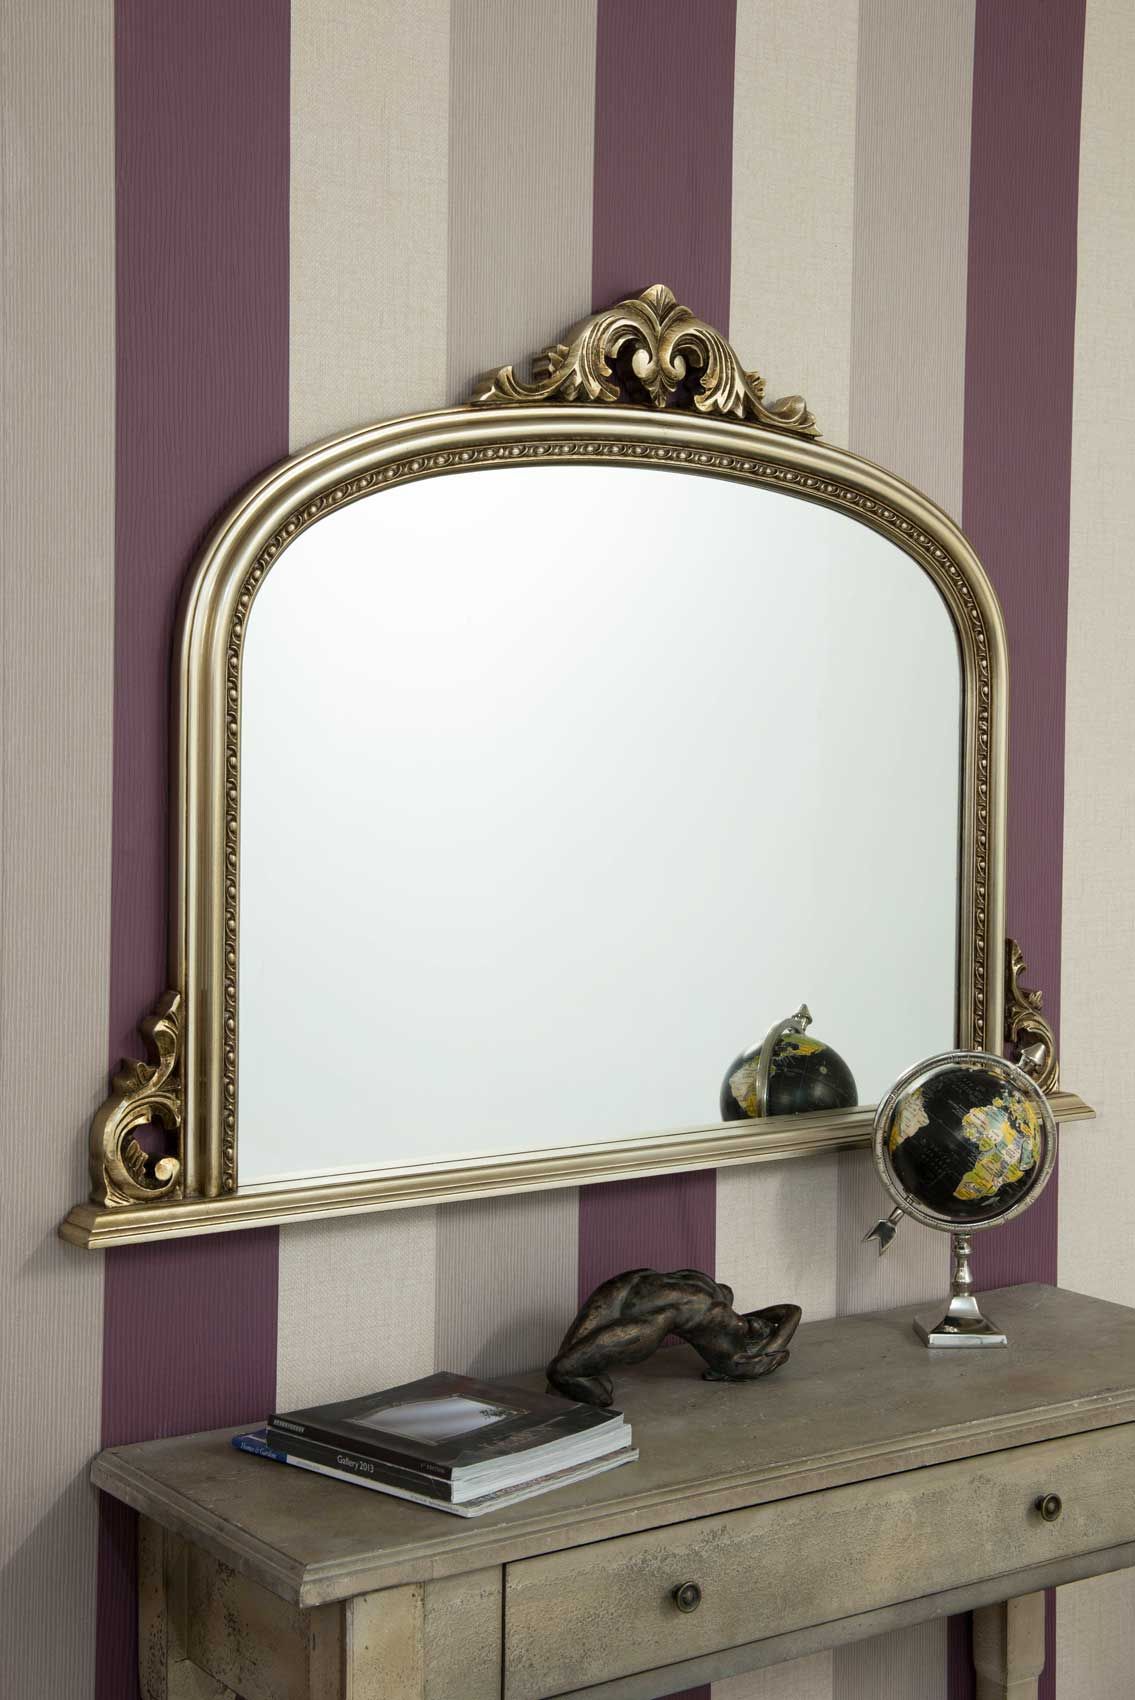 Large Silver Antique Design Over Mantle Big Wall Mirror 4Ft2 X 3Ft With Antiqued Glass Wall Mirrors (View 10 of 15)